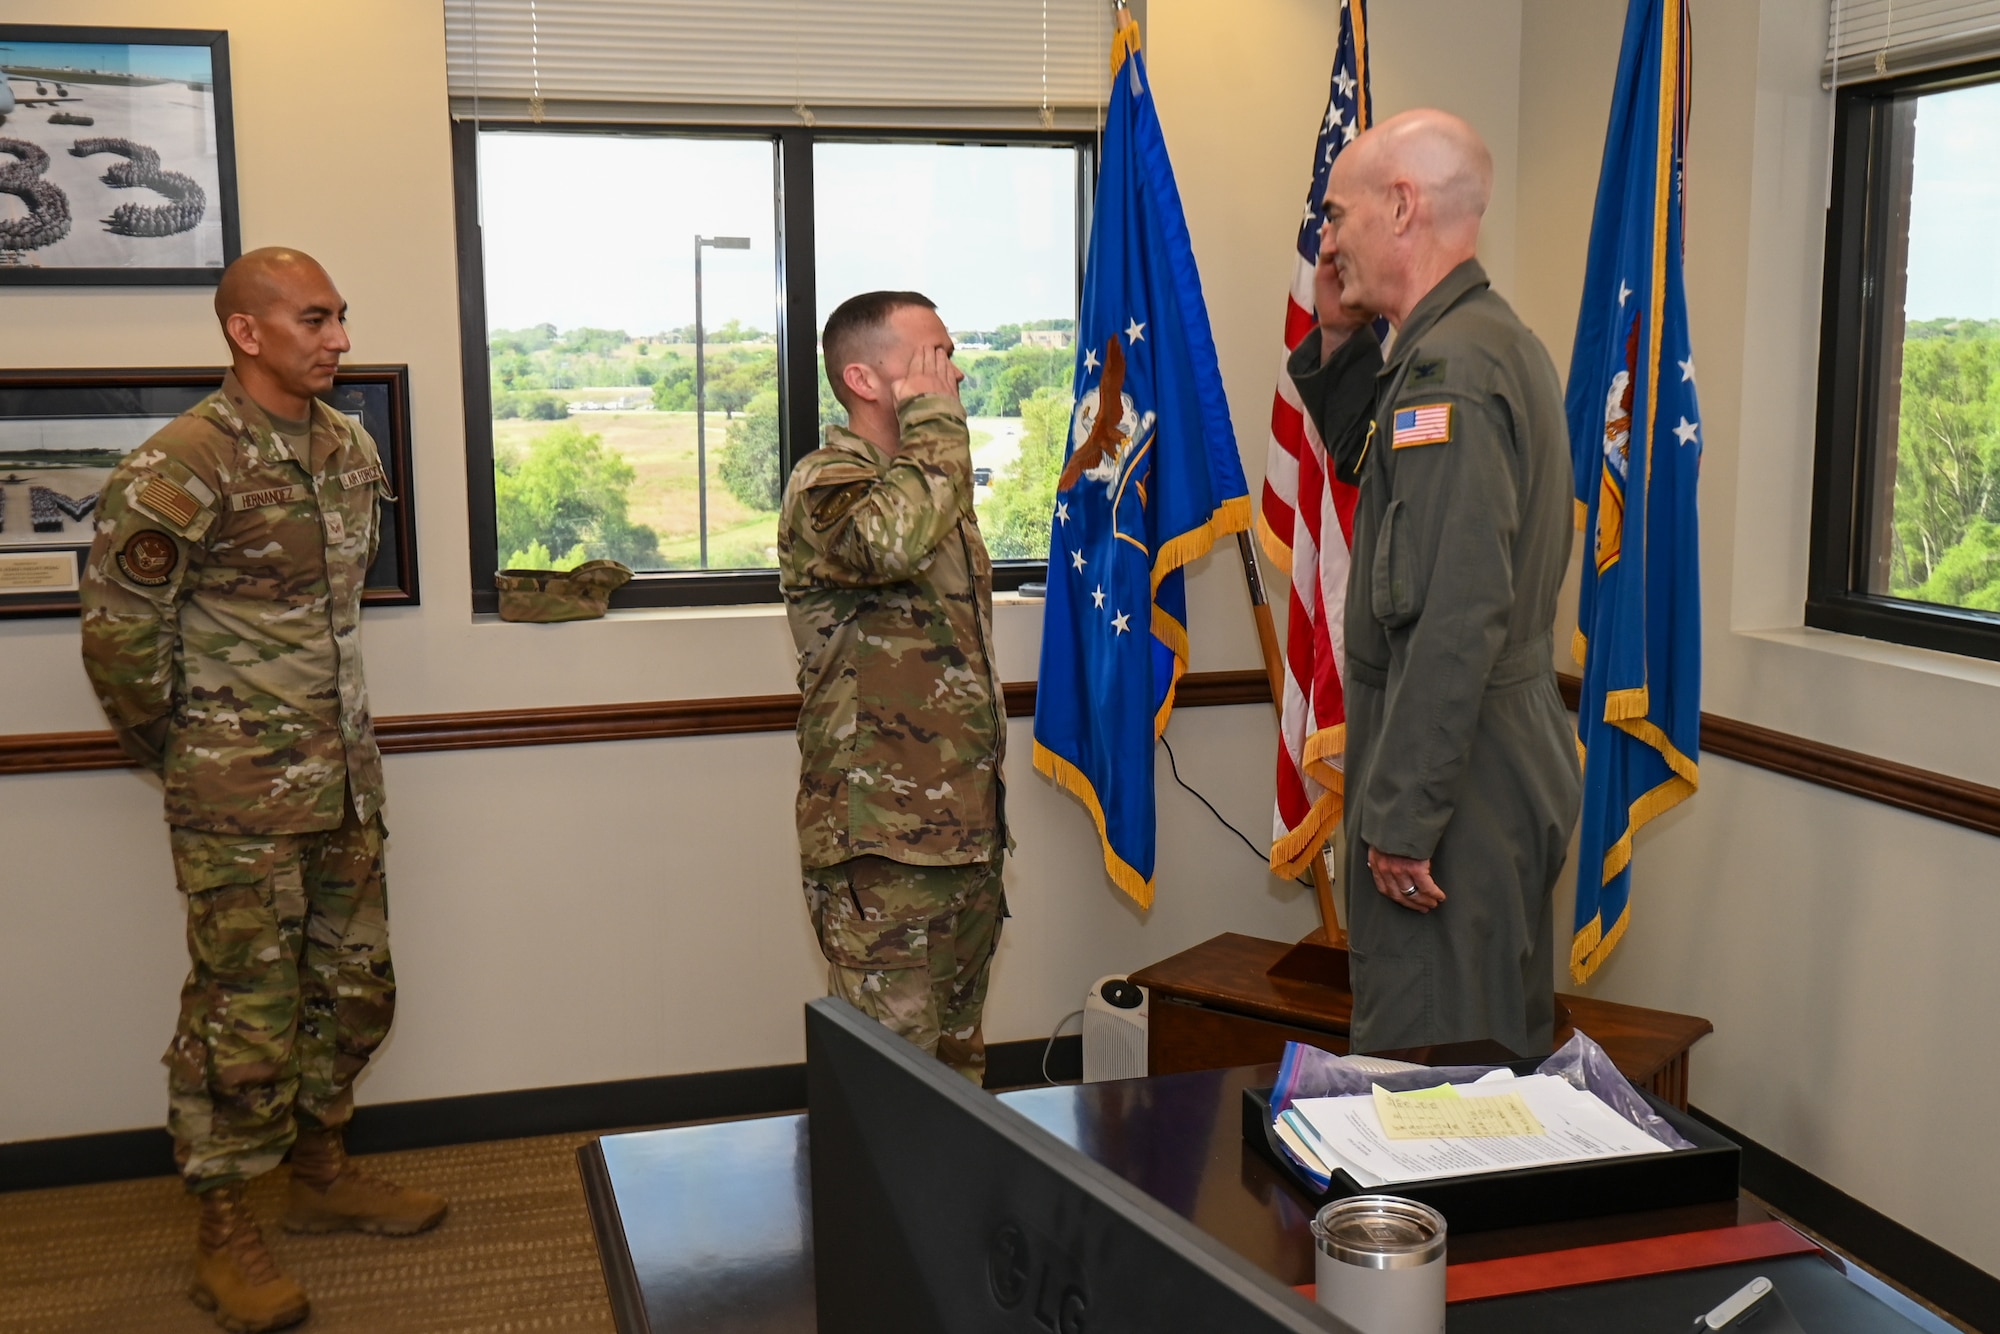 Chief Master Sgt. Kurtis Albright, center, salutes Col. William Gutermuth, right, 433rd Airlift Wing commander, after receiving the wing commander’s coin for delivering first aid to two people hurt in a crash.